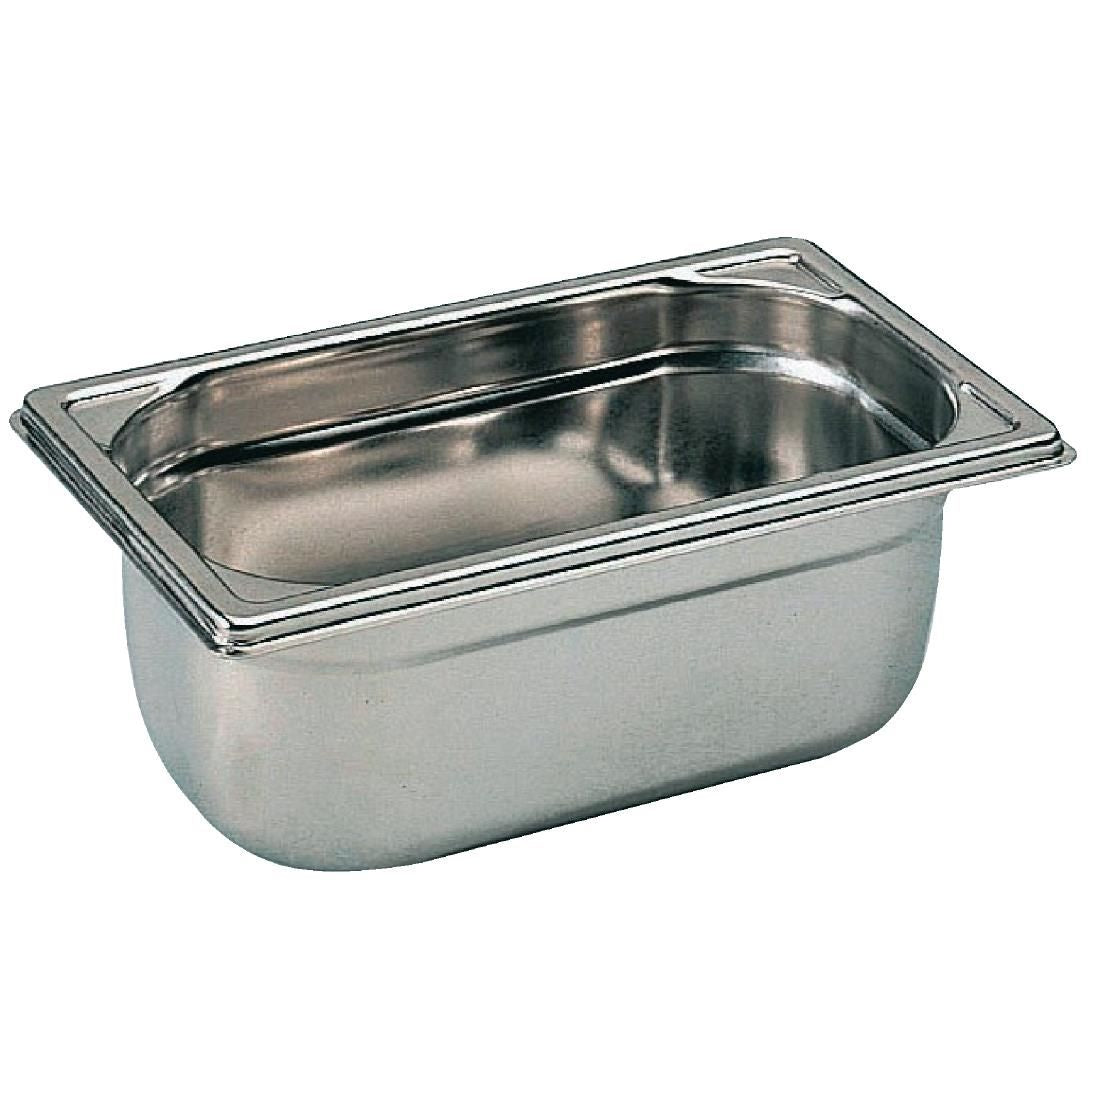 Bourgeat Stainless Steel 1/4 Gastronorm Pan 150mm JD Catering Equipment Solutions Ltd